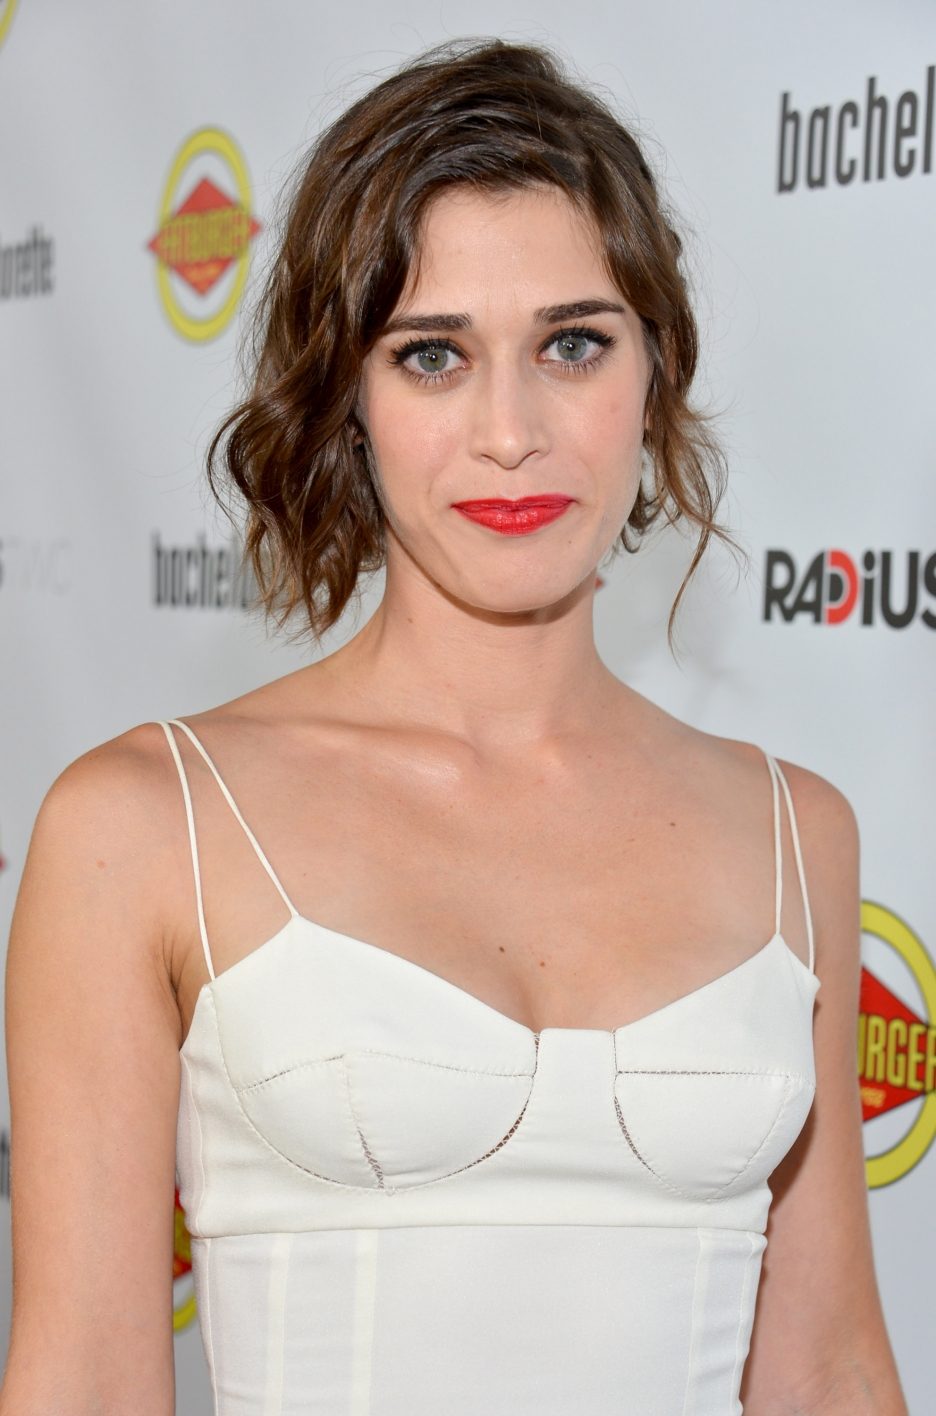 Lizzy Caplan To Co Star Alongside Seth Rogen And James